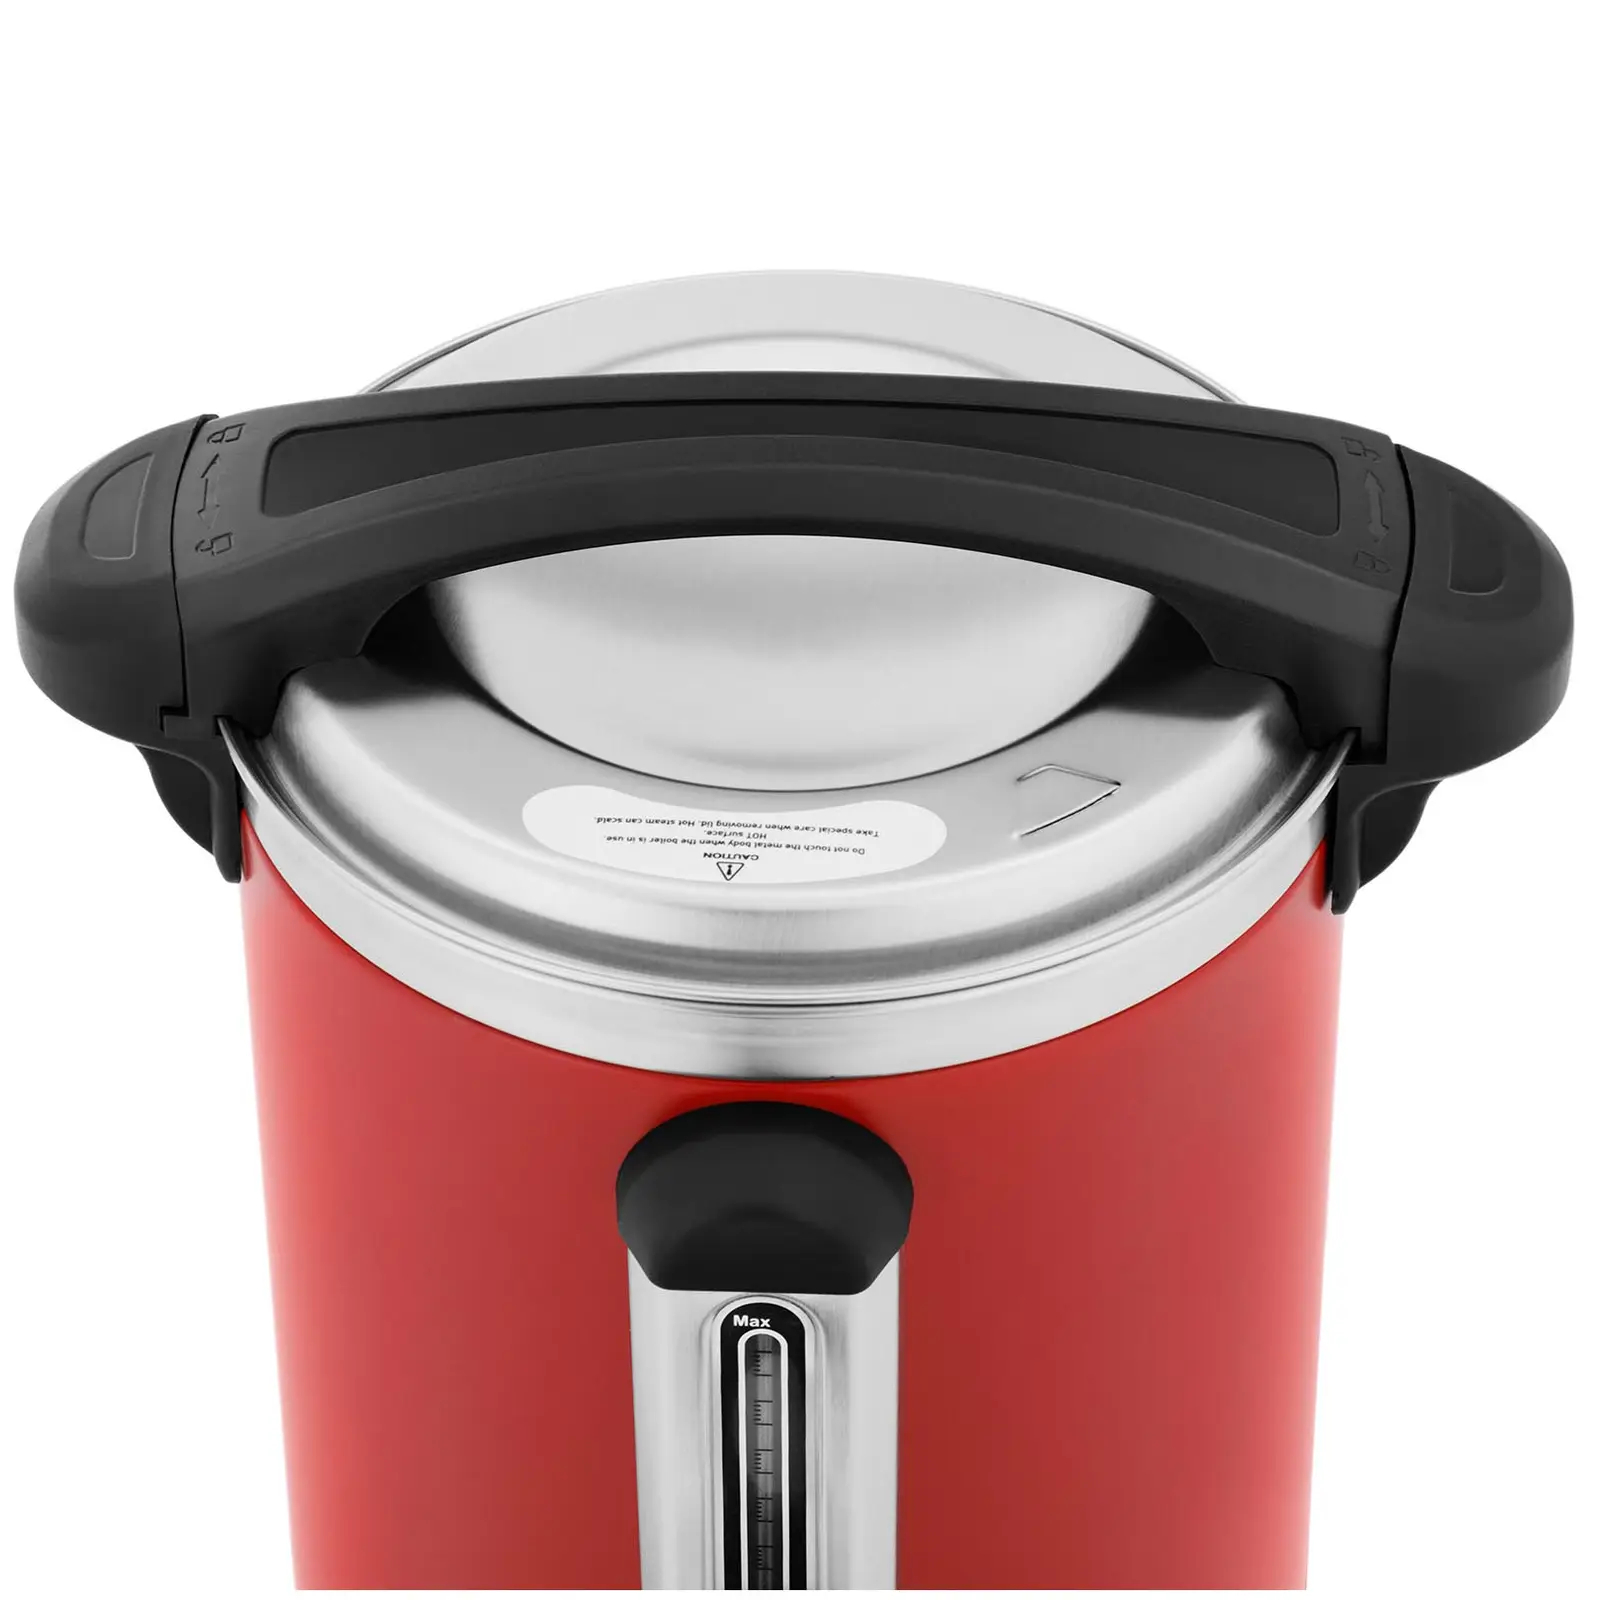 Kettle - 6.1 L - 1500 W - Red